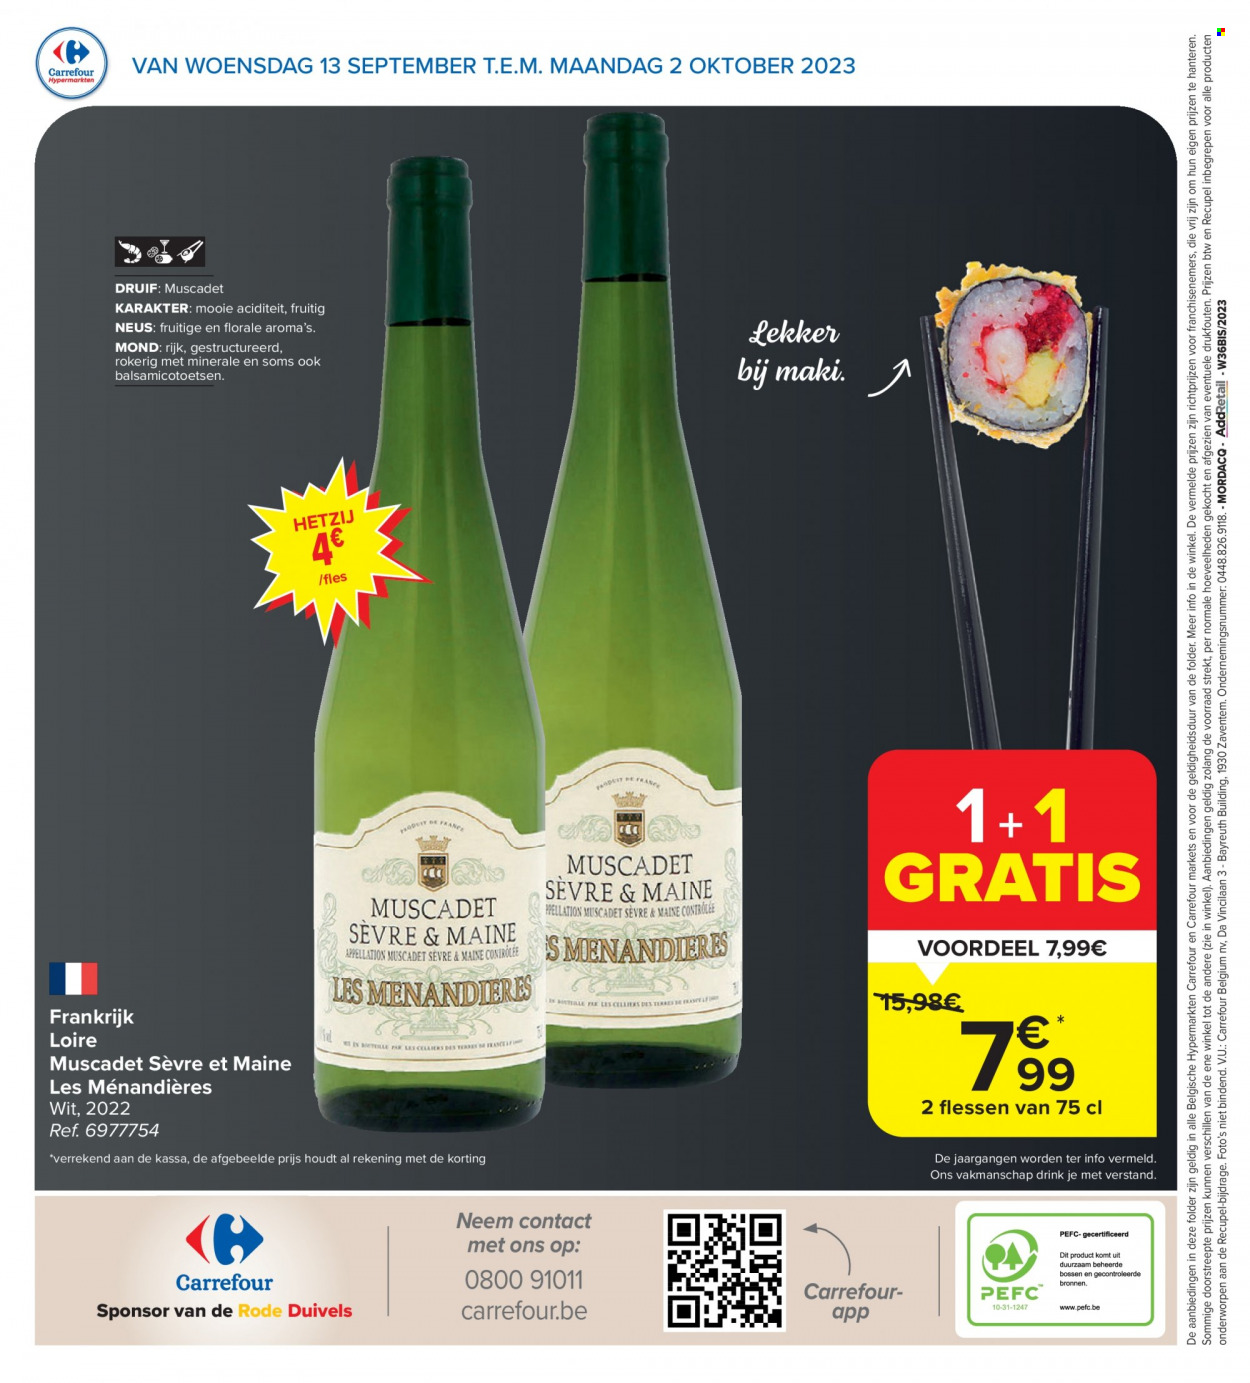 Catalogue Carrefour hypermarkt - 13.9.2023 - 2.10.2023. Page 28.